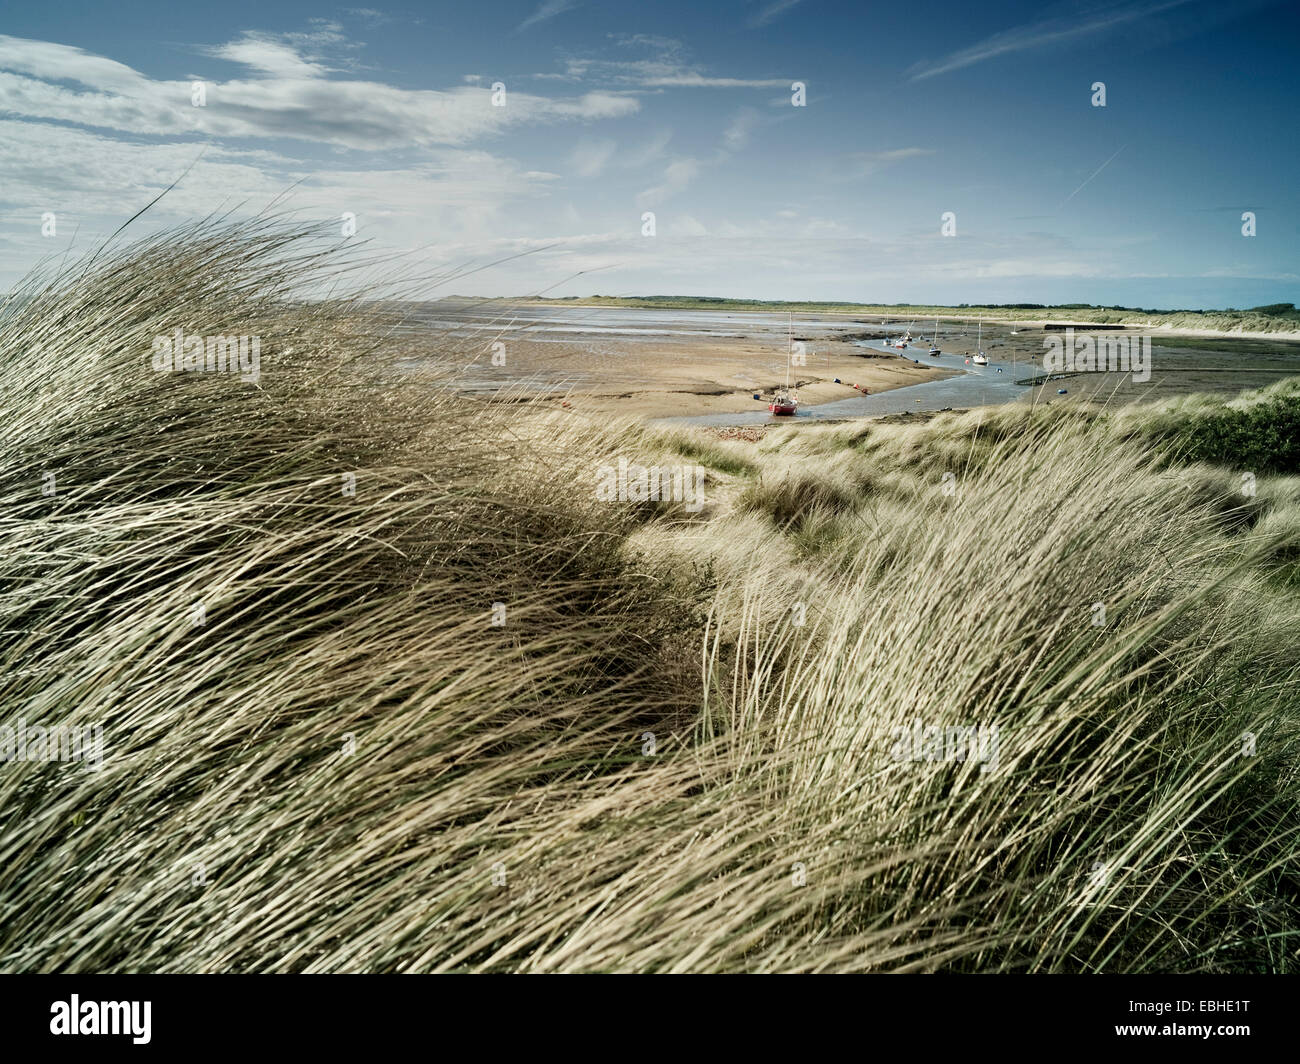 Dune grass and boats, Formby, England Stock Photo